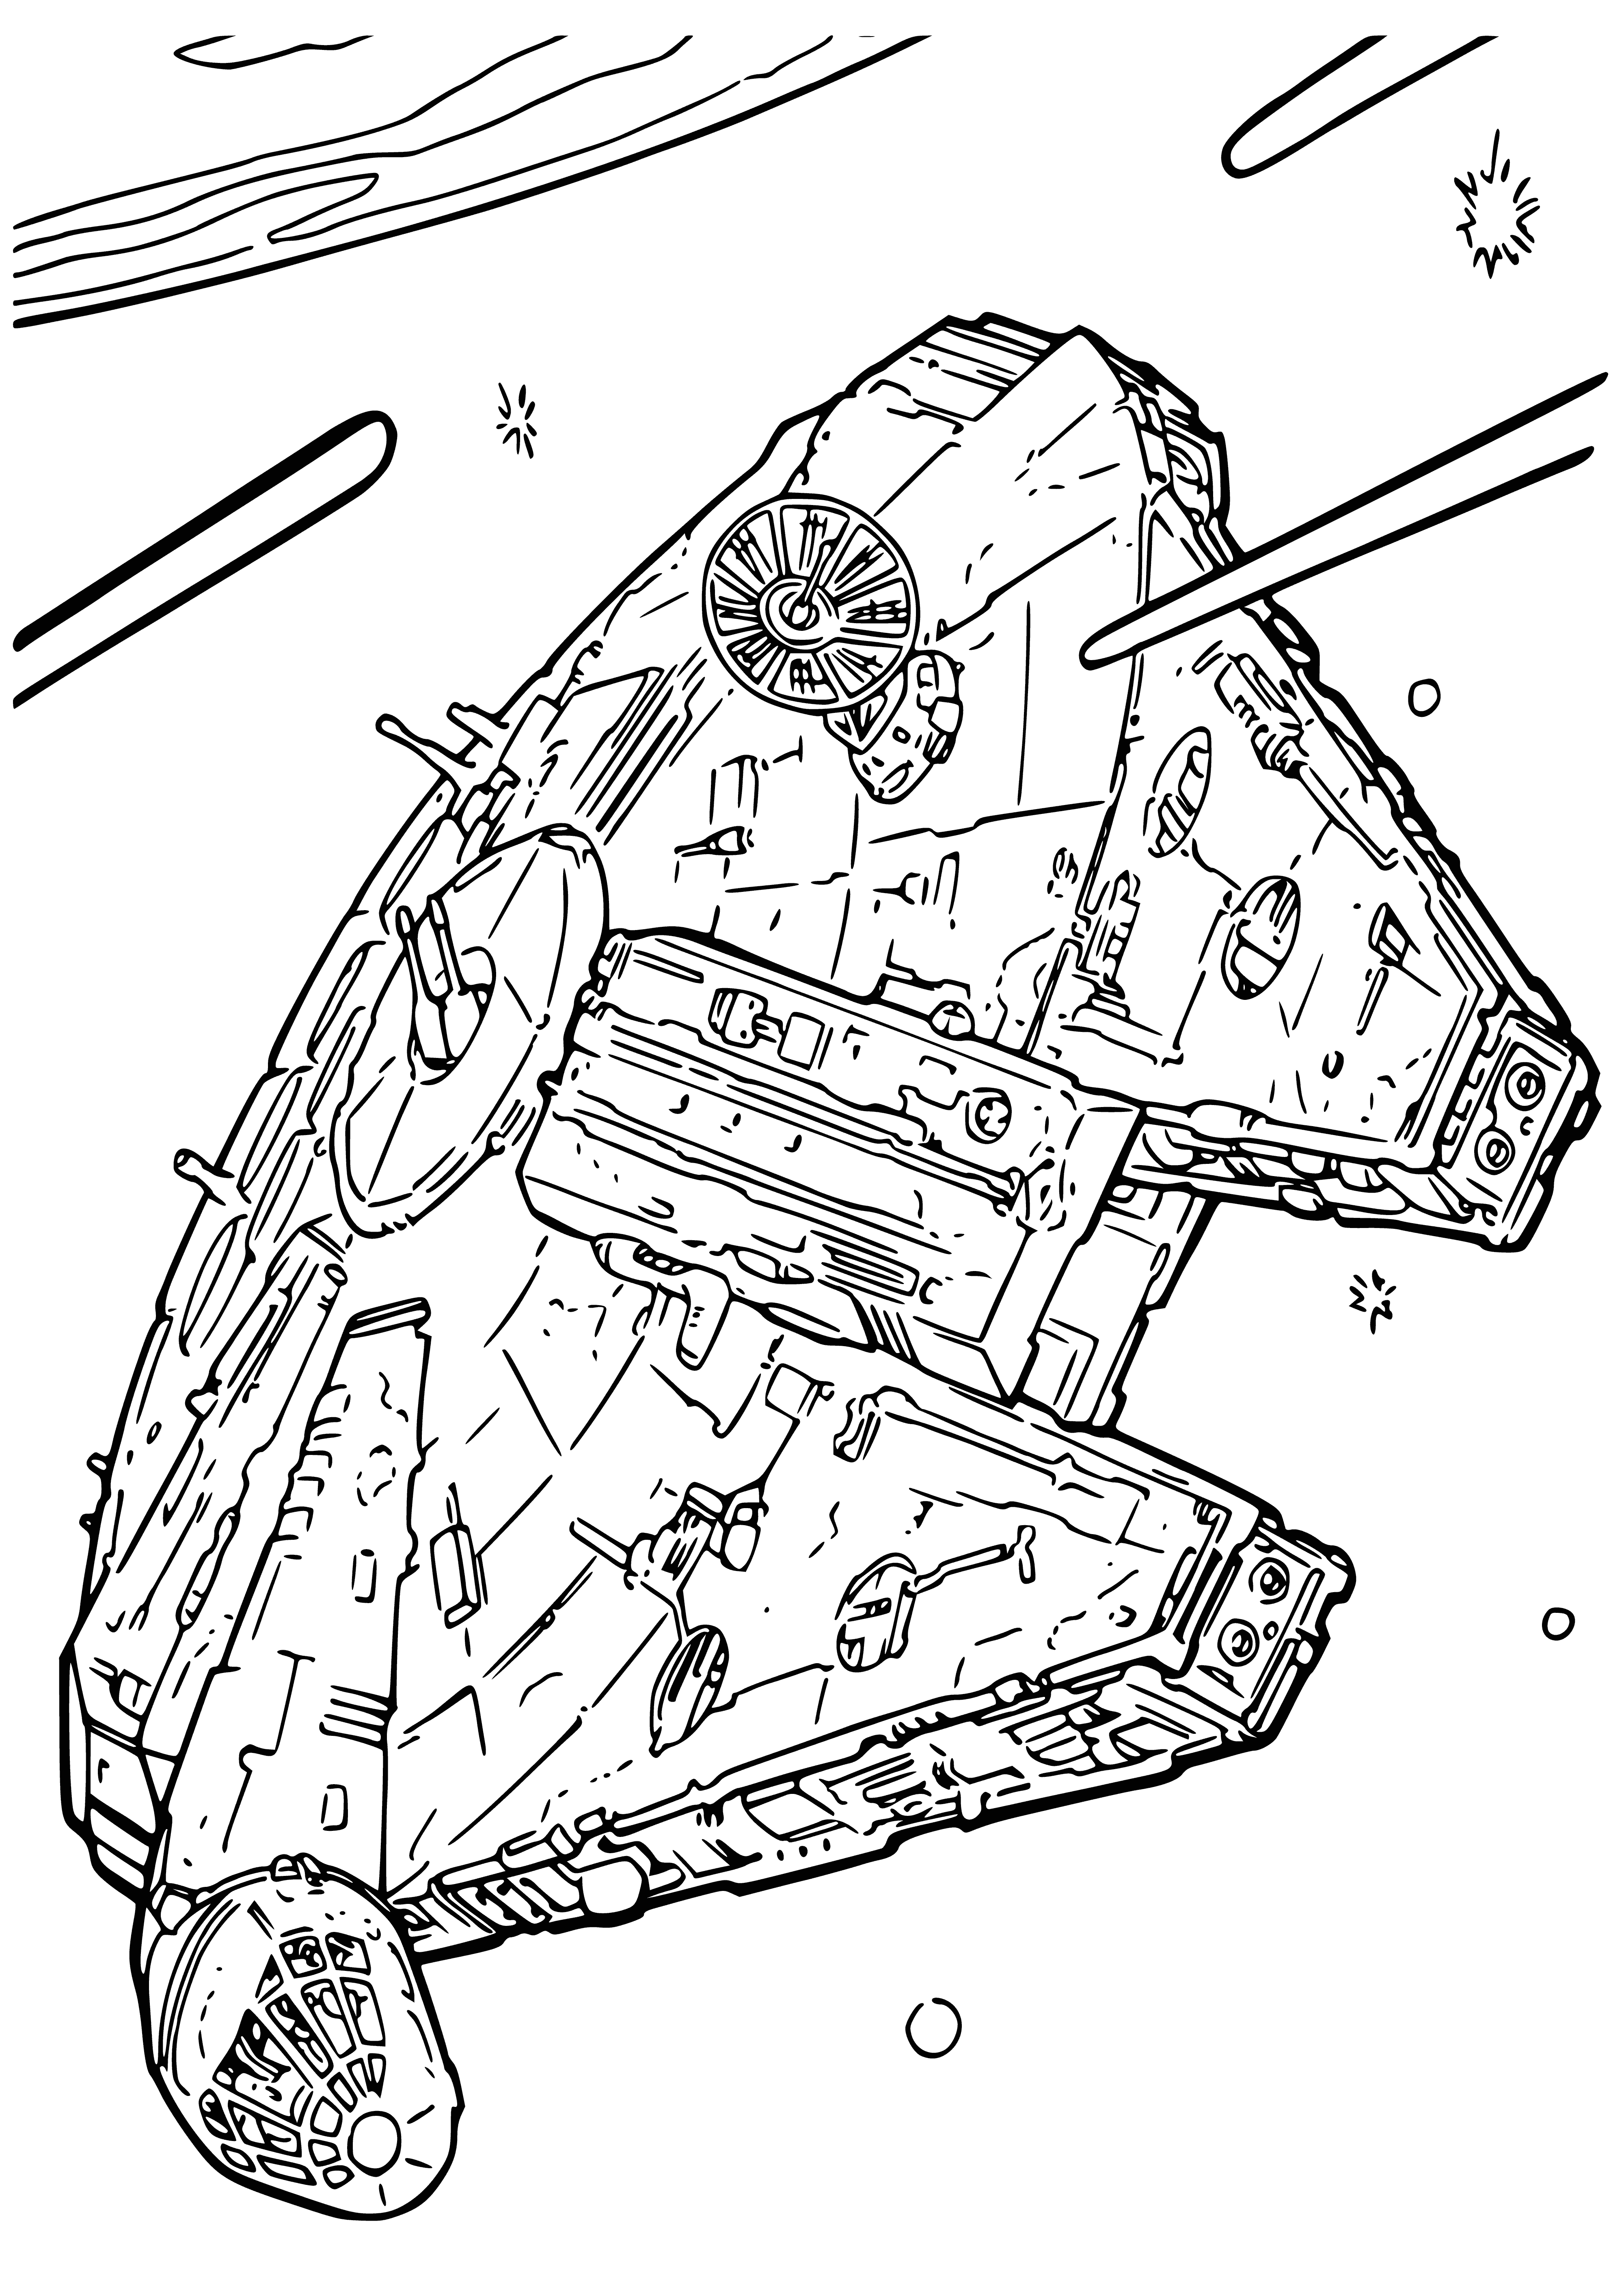 coloring page: The Millennium Falcon is a large, angular vessel piloted by Han Solo in the Star Wars universe. It has several engines and a ramp leading to its hold, where Solo keeps his prized possession.